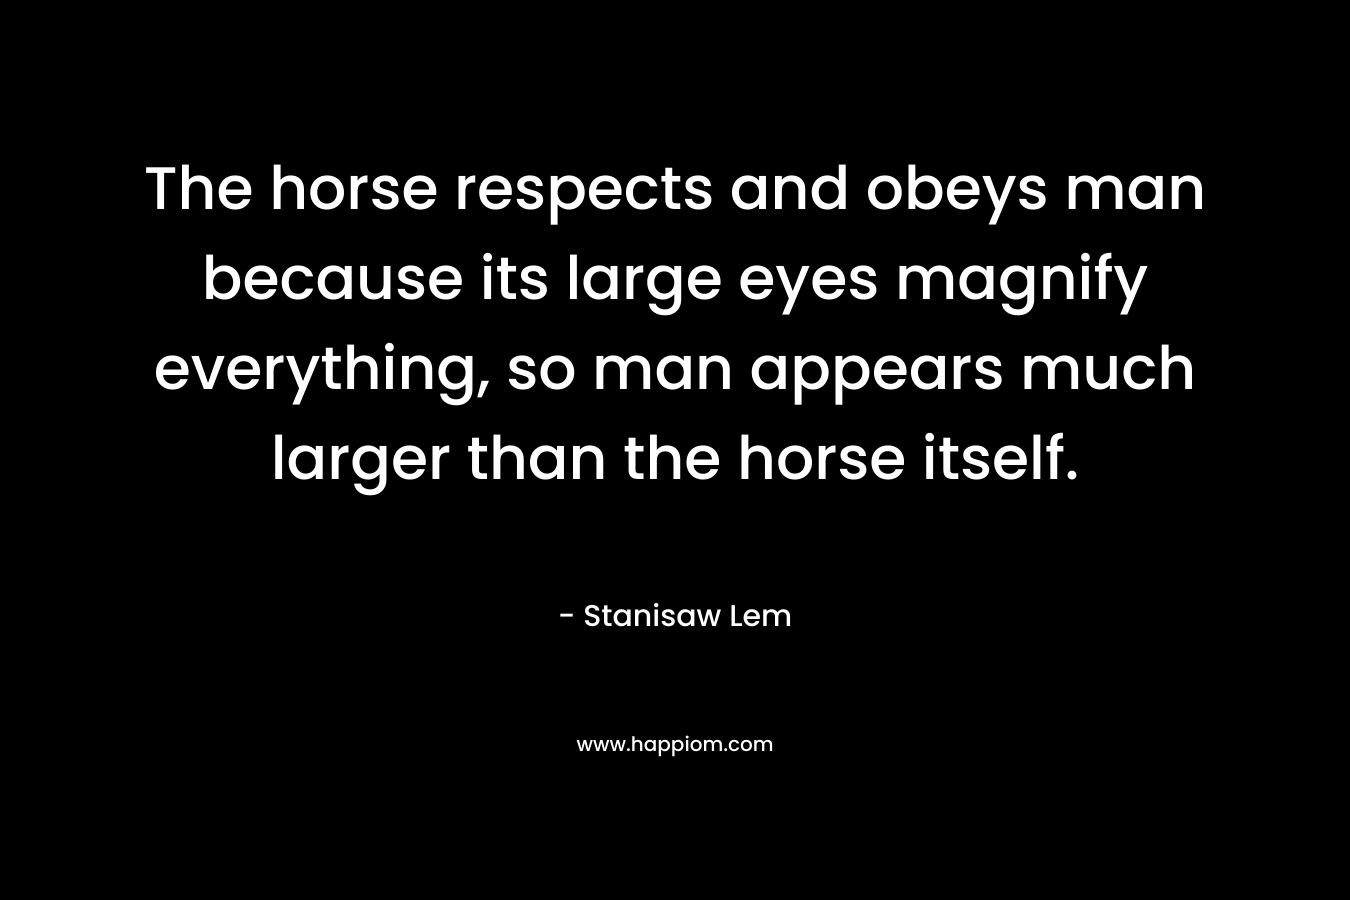 The horse respects and obeys man because its large eyes magnify everything, so man appears much larger than the horse itself.